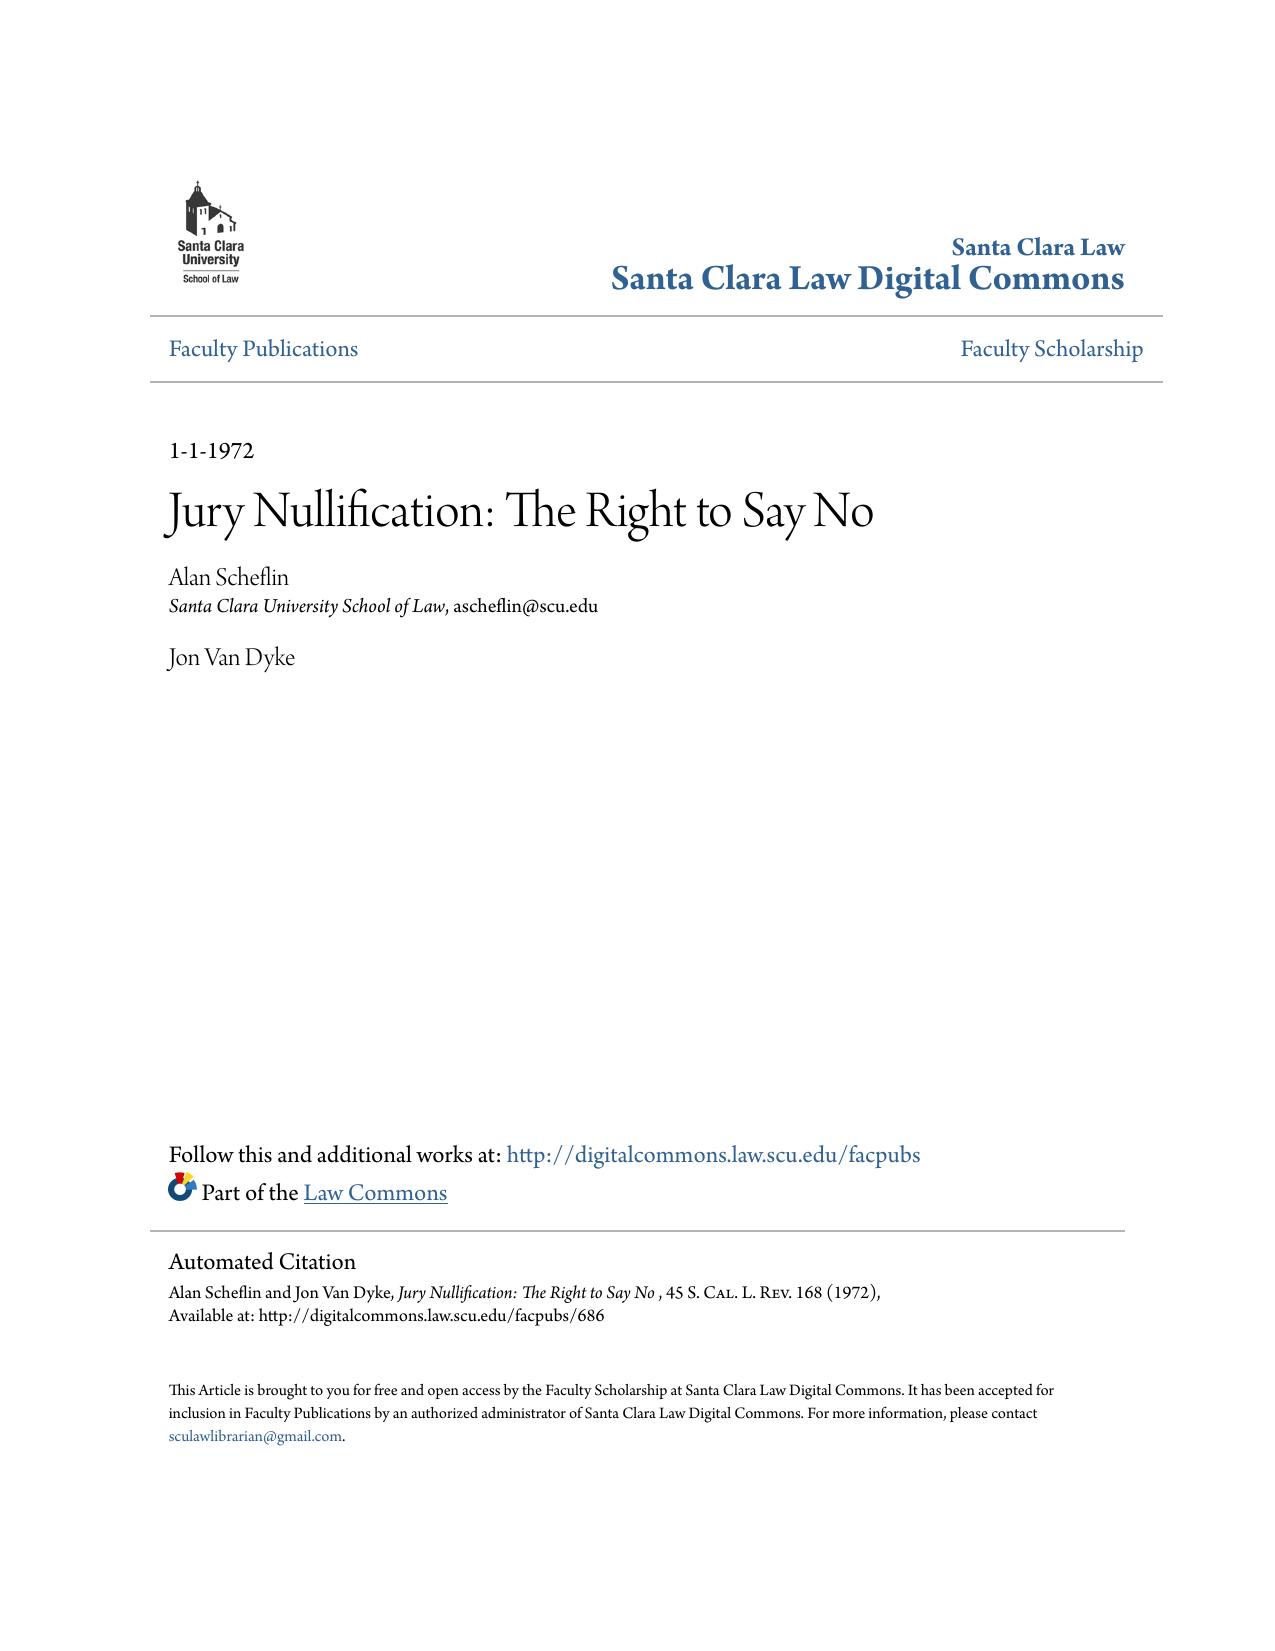 Jury Nullification: The Right to Say No (1972) by Alan Scheflin